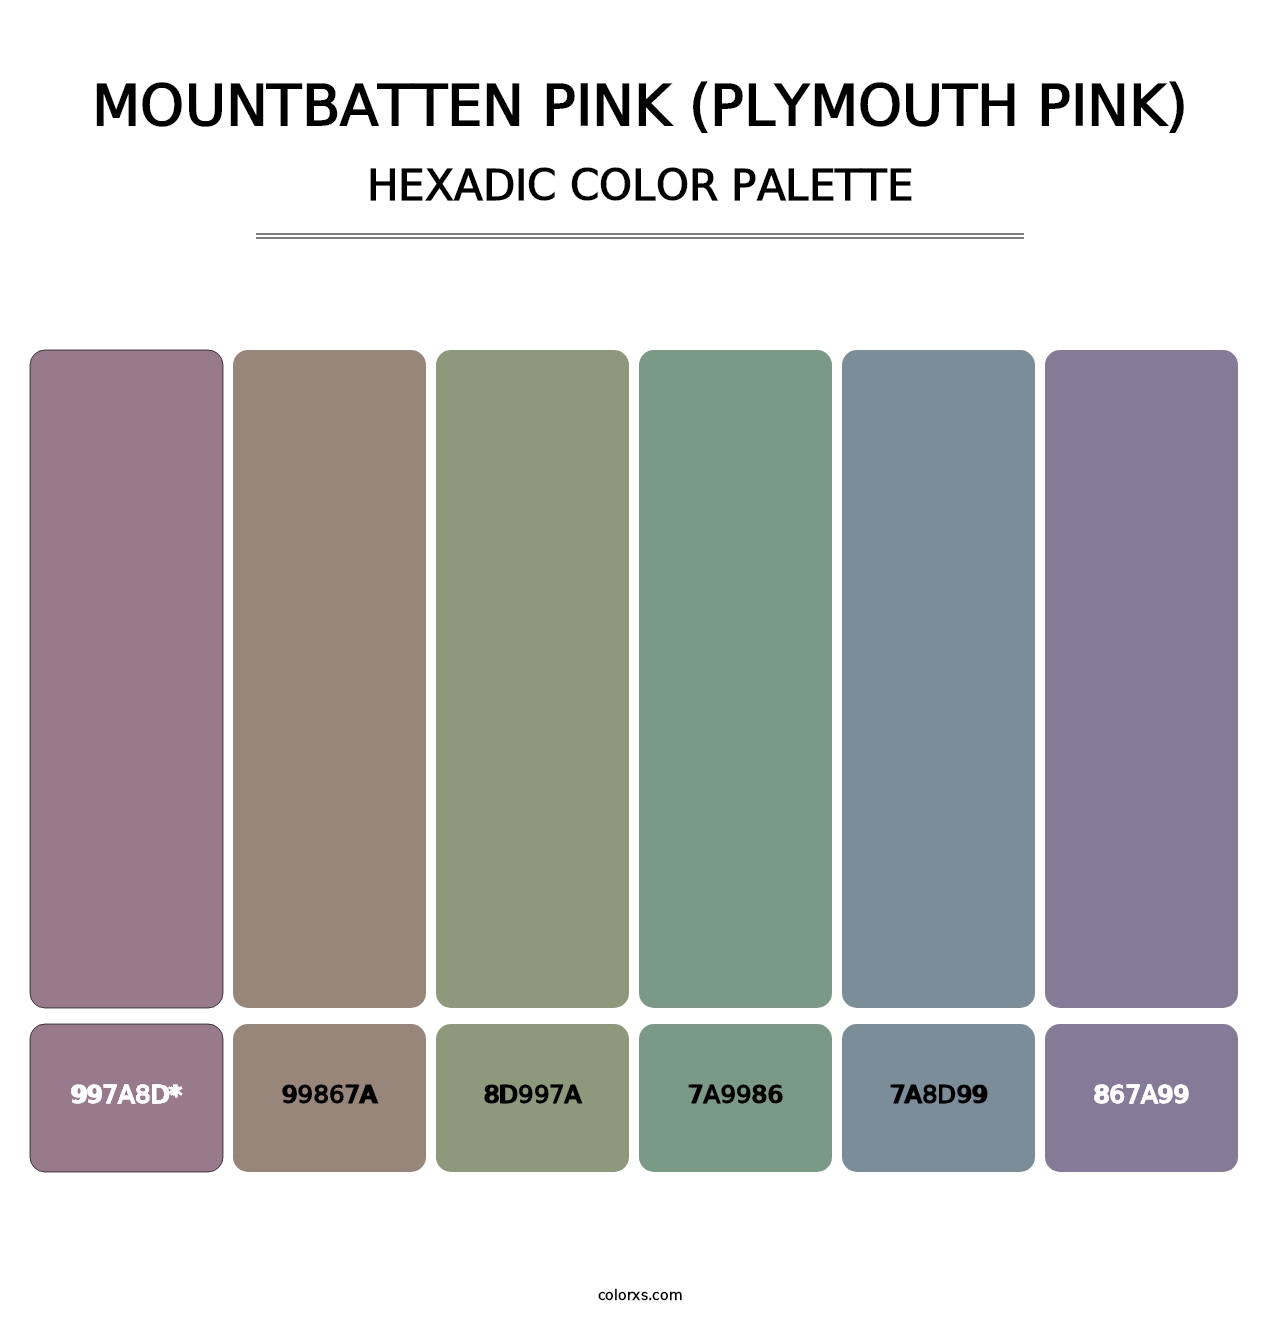 Mountbatten Pink (Plymouth Pink) - Hexadic Color Palette